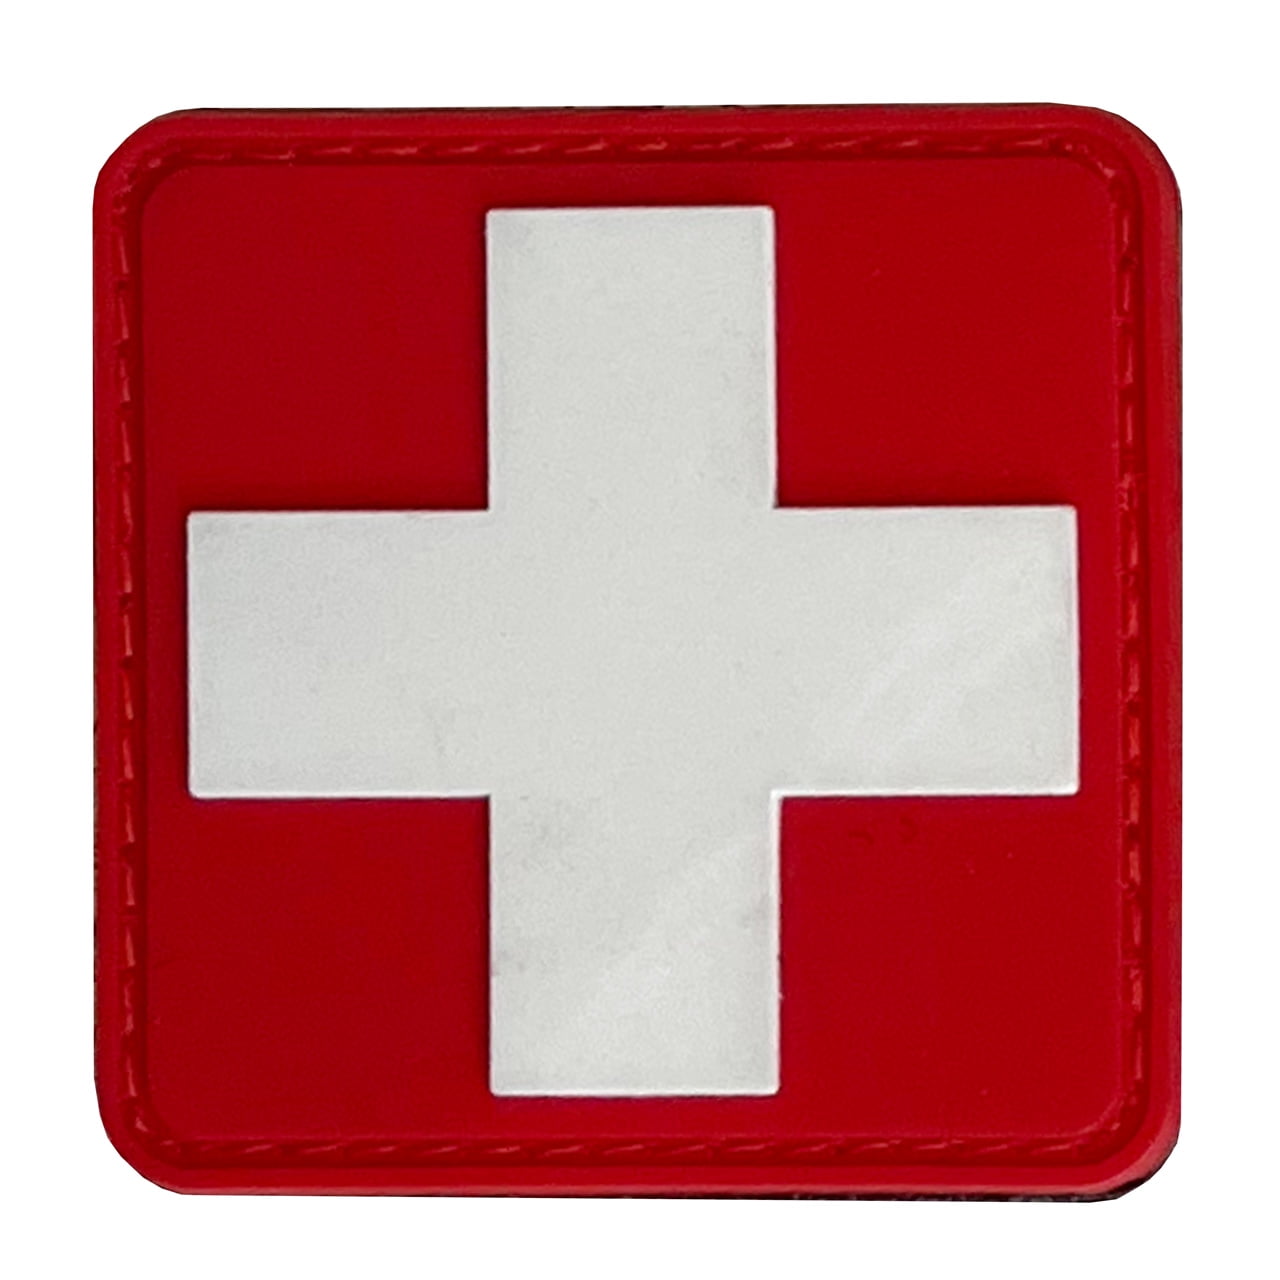 Rescue Essentials PVC Cross Patch, Velcro-Backed - Blue on Black 